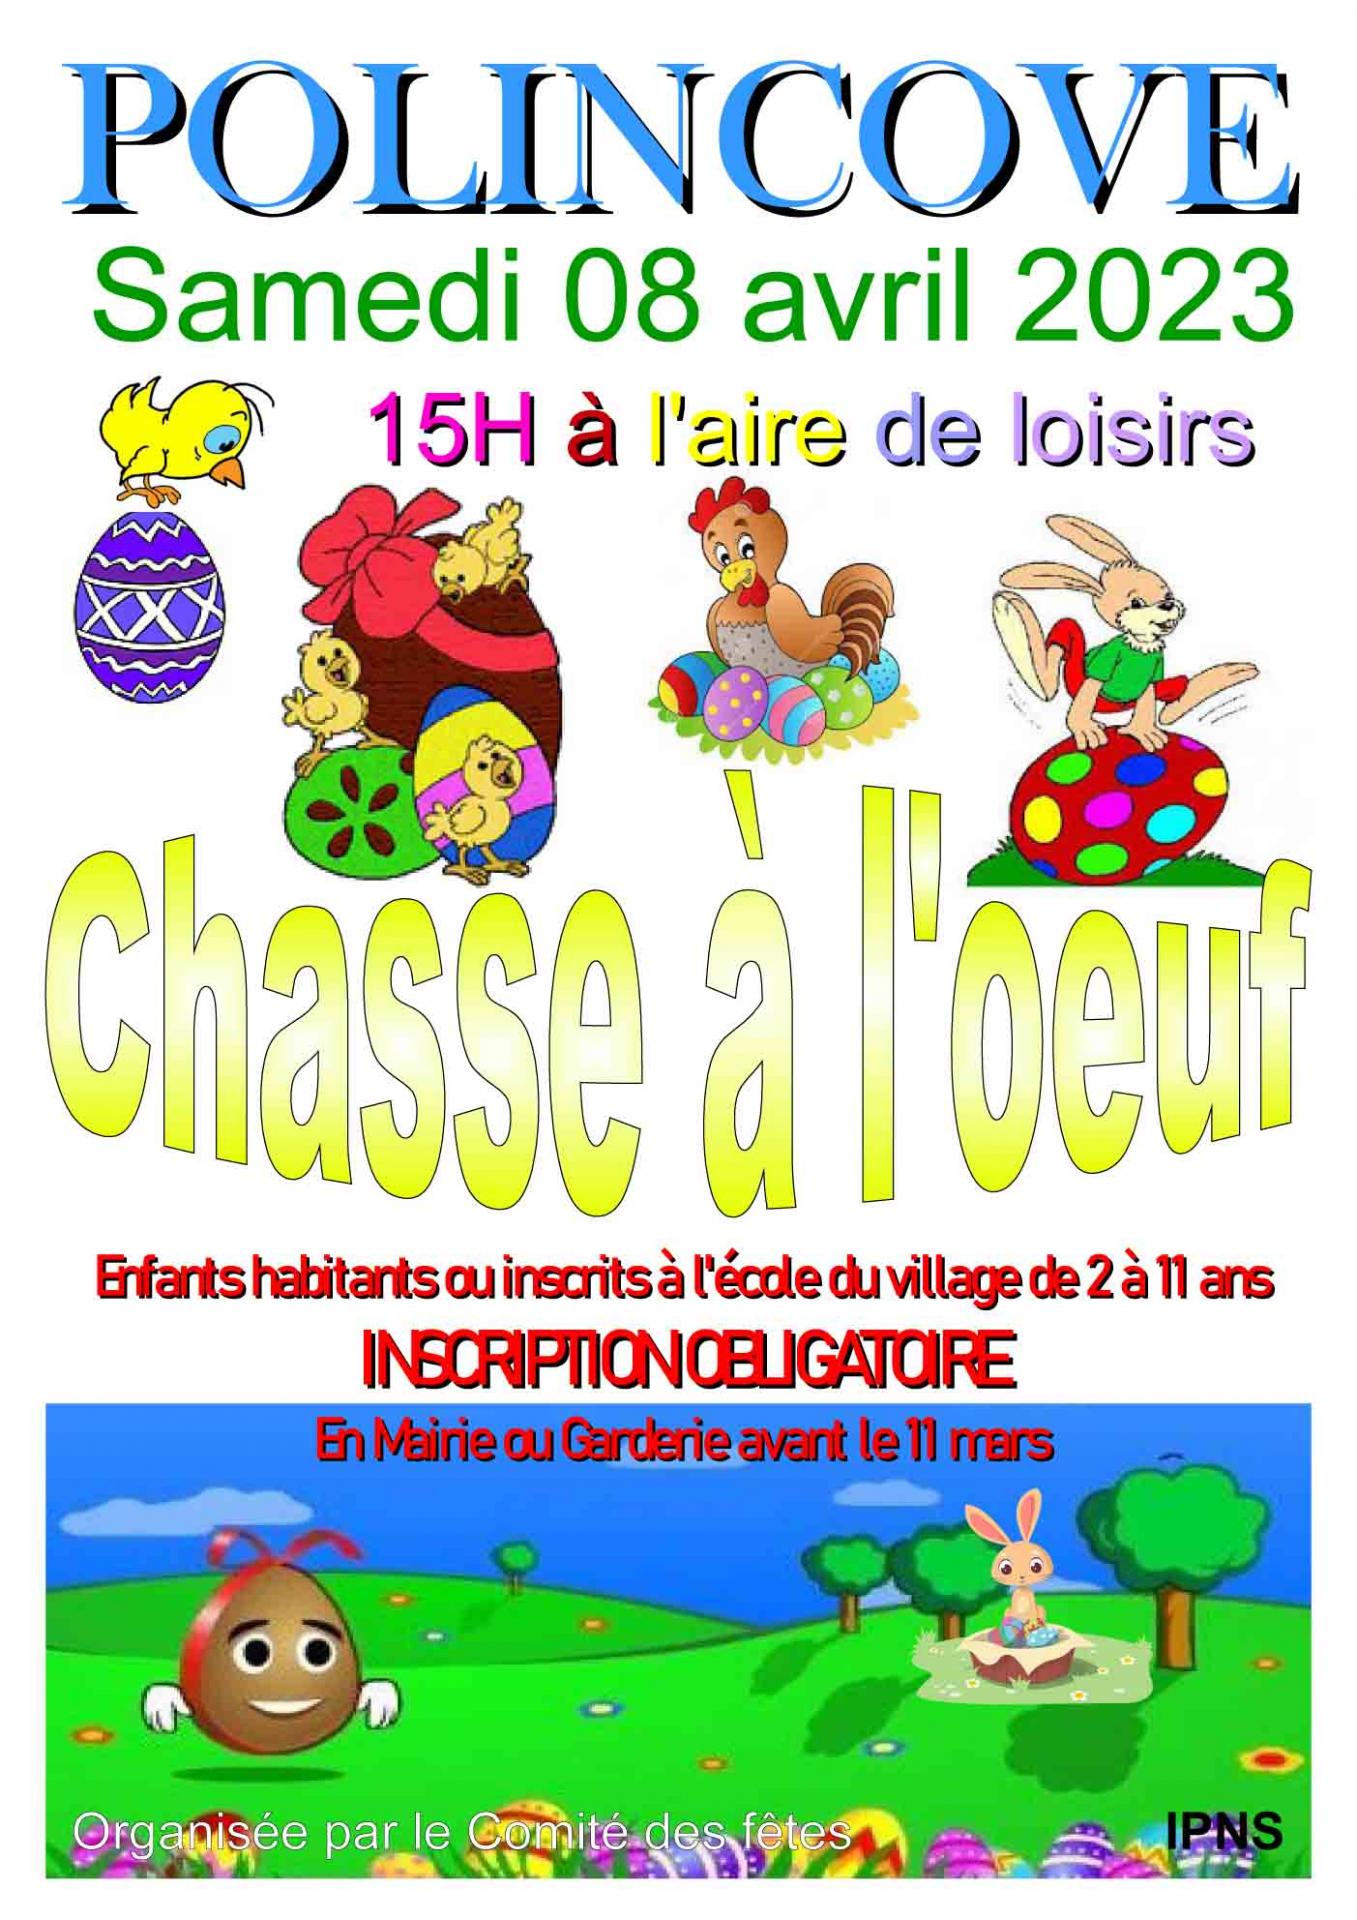 2023 chasse a l oeuf affiche a3